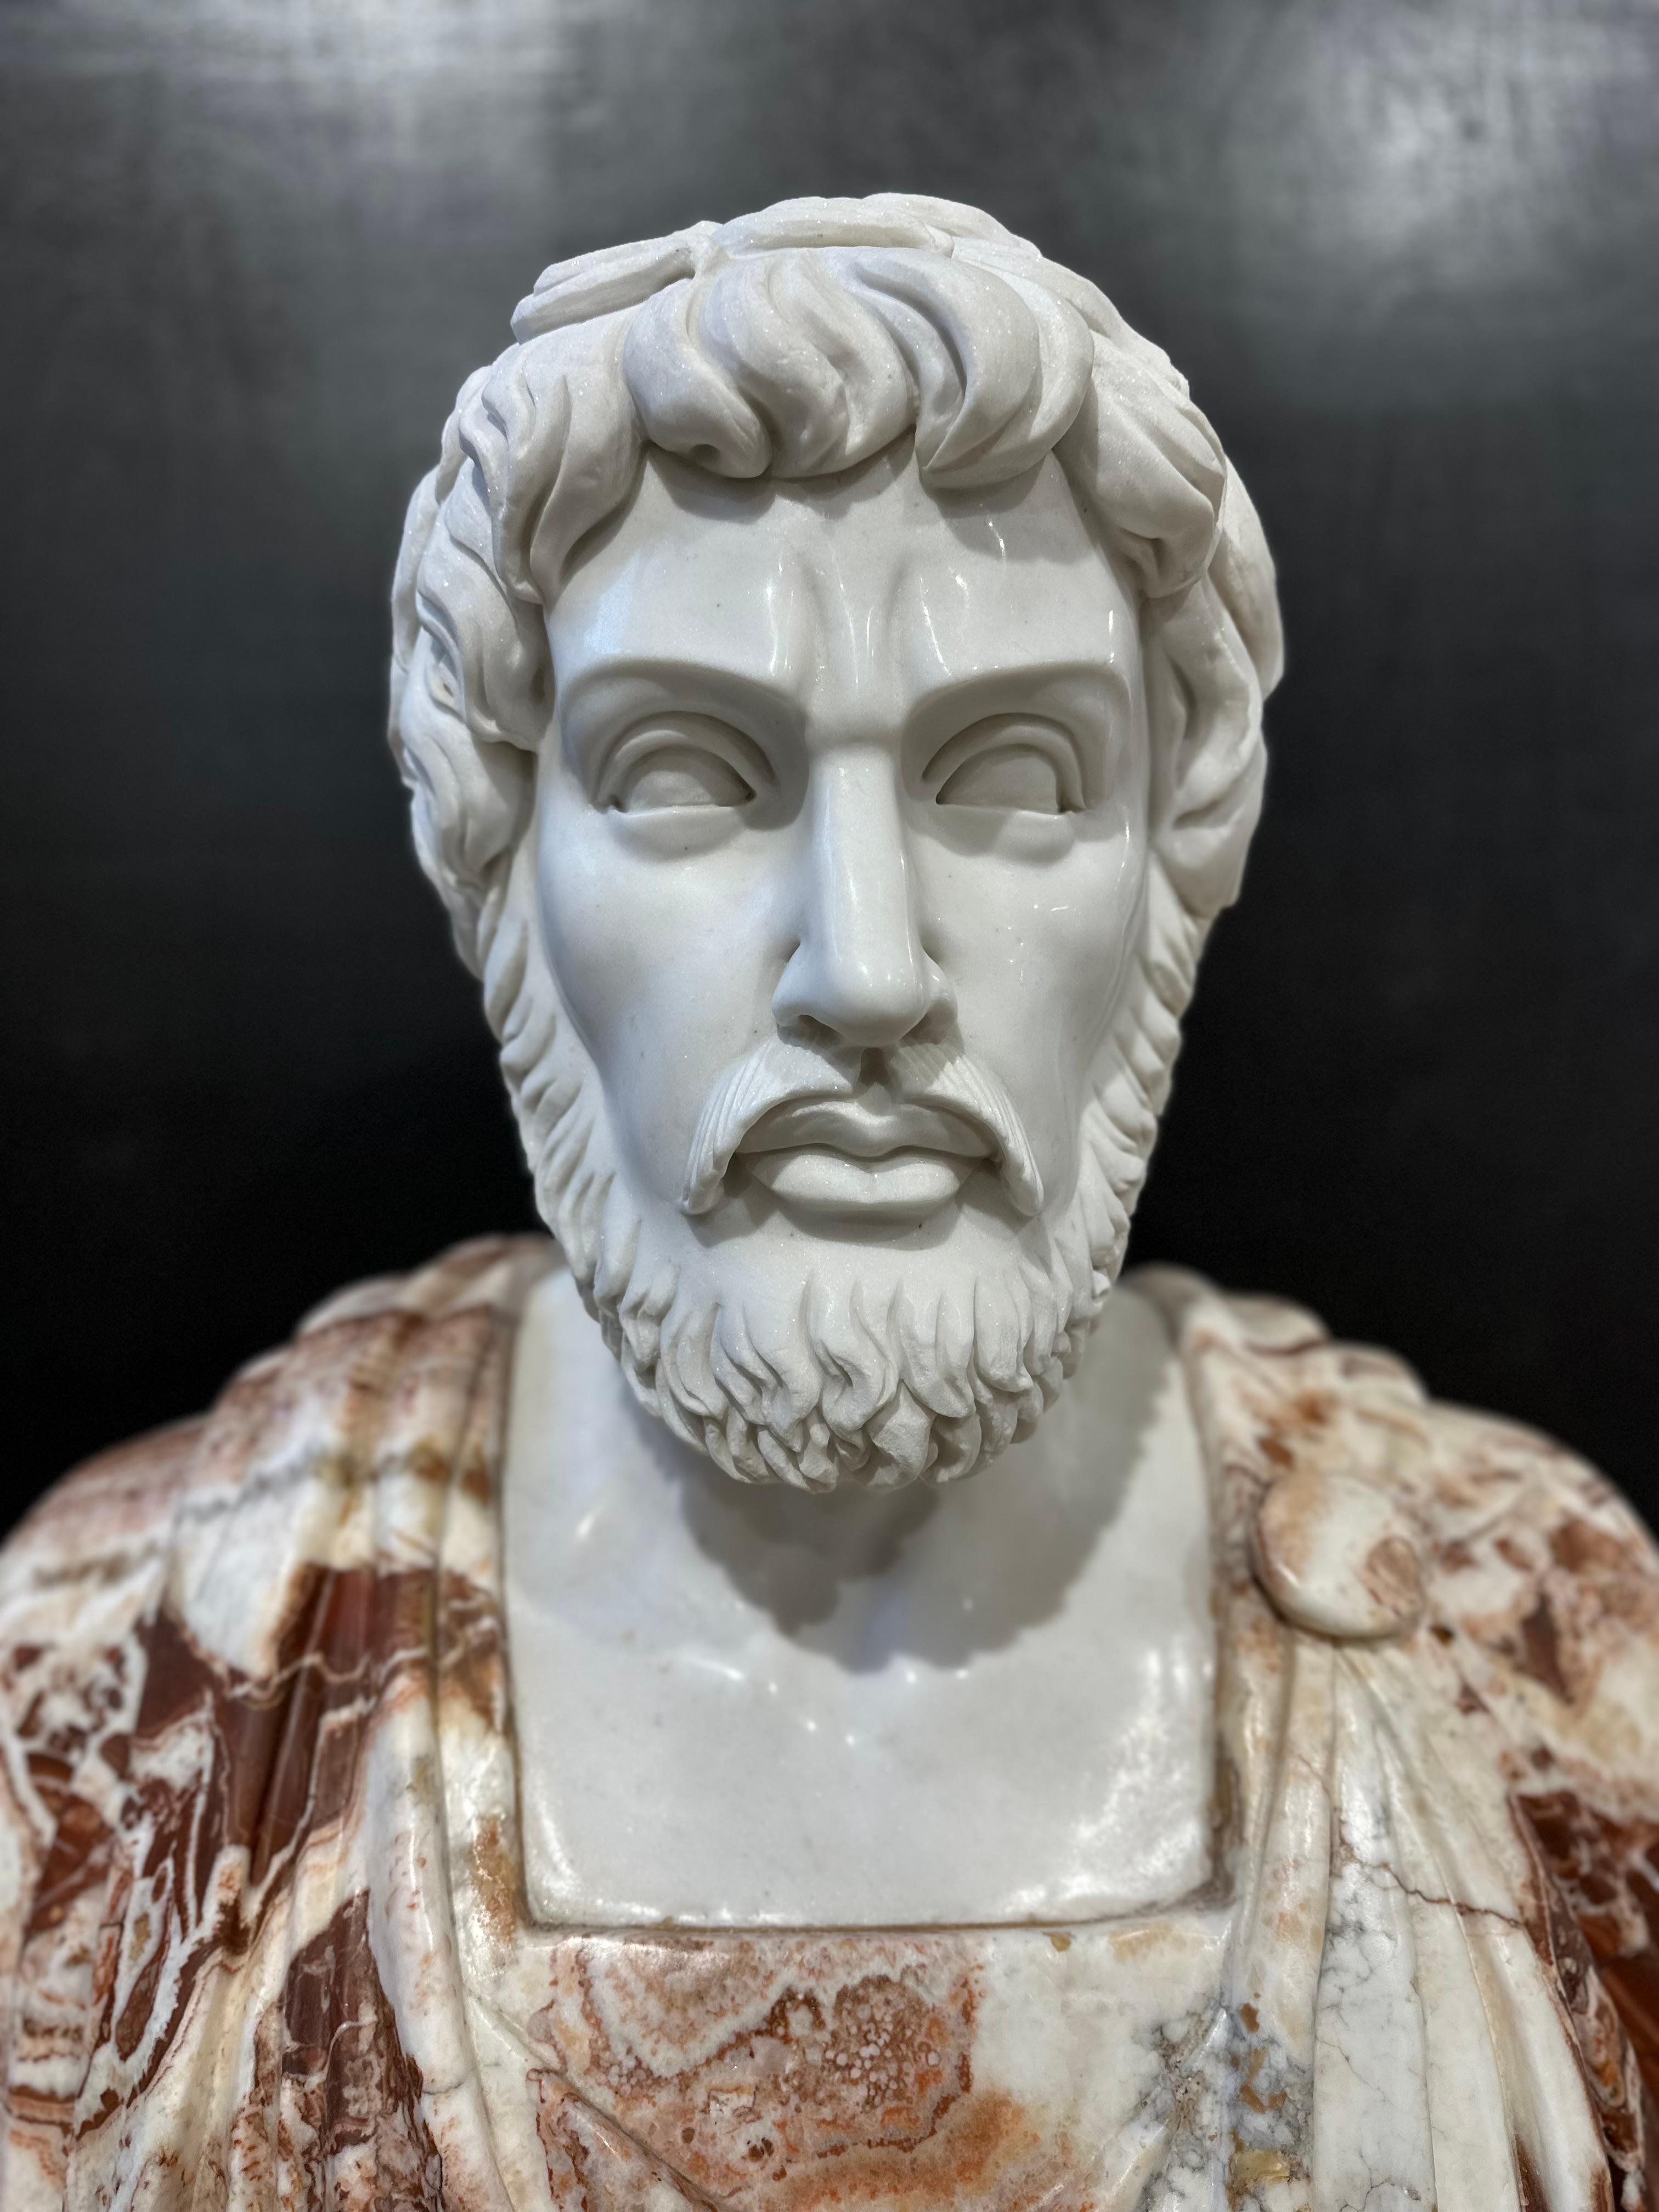 A highly decorative two colour marble Roman style bust on a black marble stand. Skilfully carved with clear features, detailing the ruffled hair and beard together with the smooth drapery of the cloth. This bust would look superb as a centrepiece on